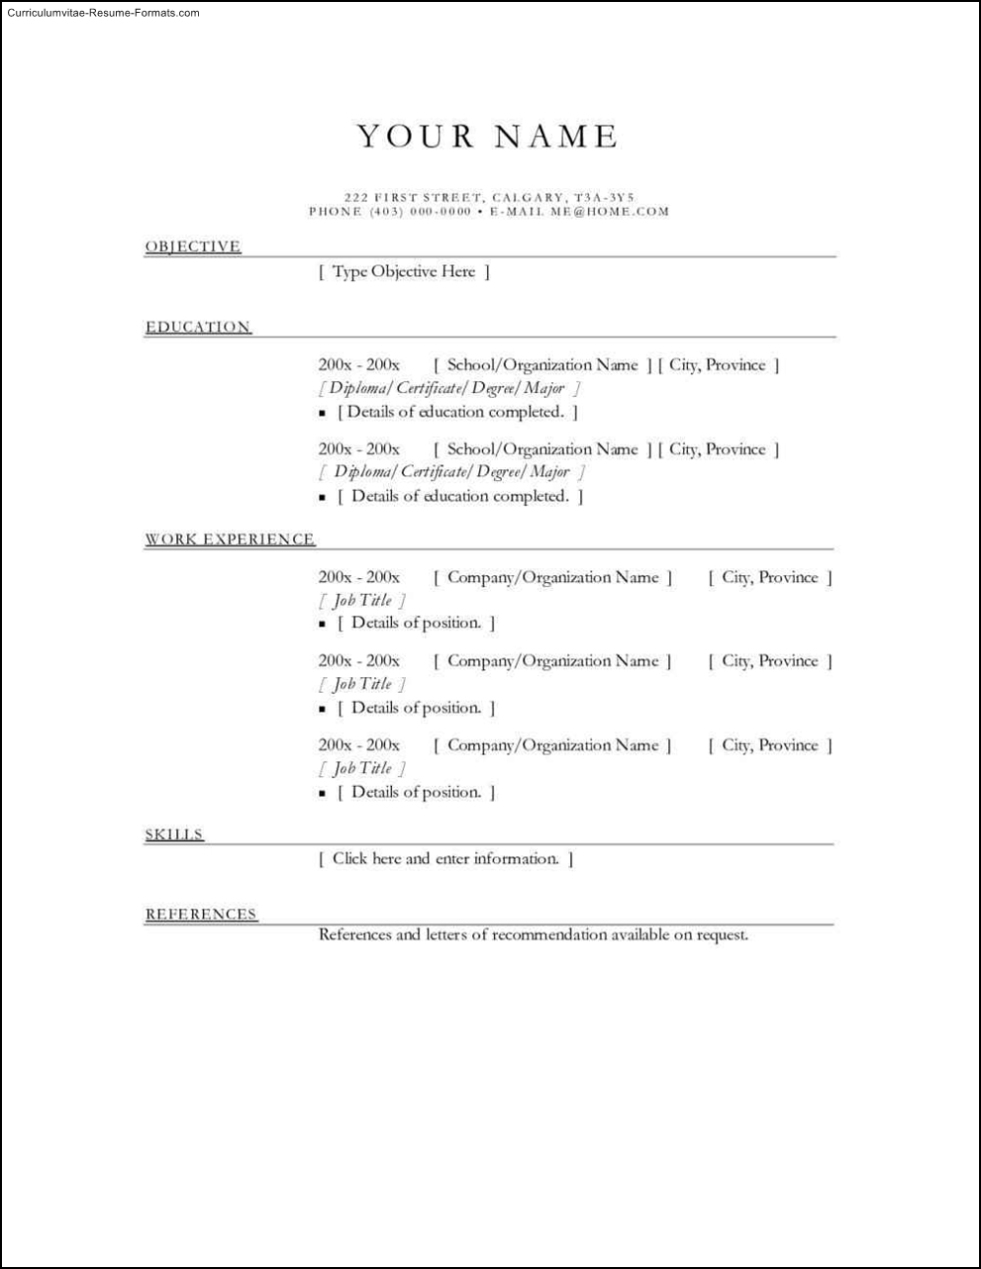 Cv Simple Word - 25 Resume Templates For Microsoft Word Free Download / You Can Find A Sample Cv pertaining to How To Get A Resume Template On Word